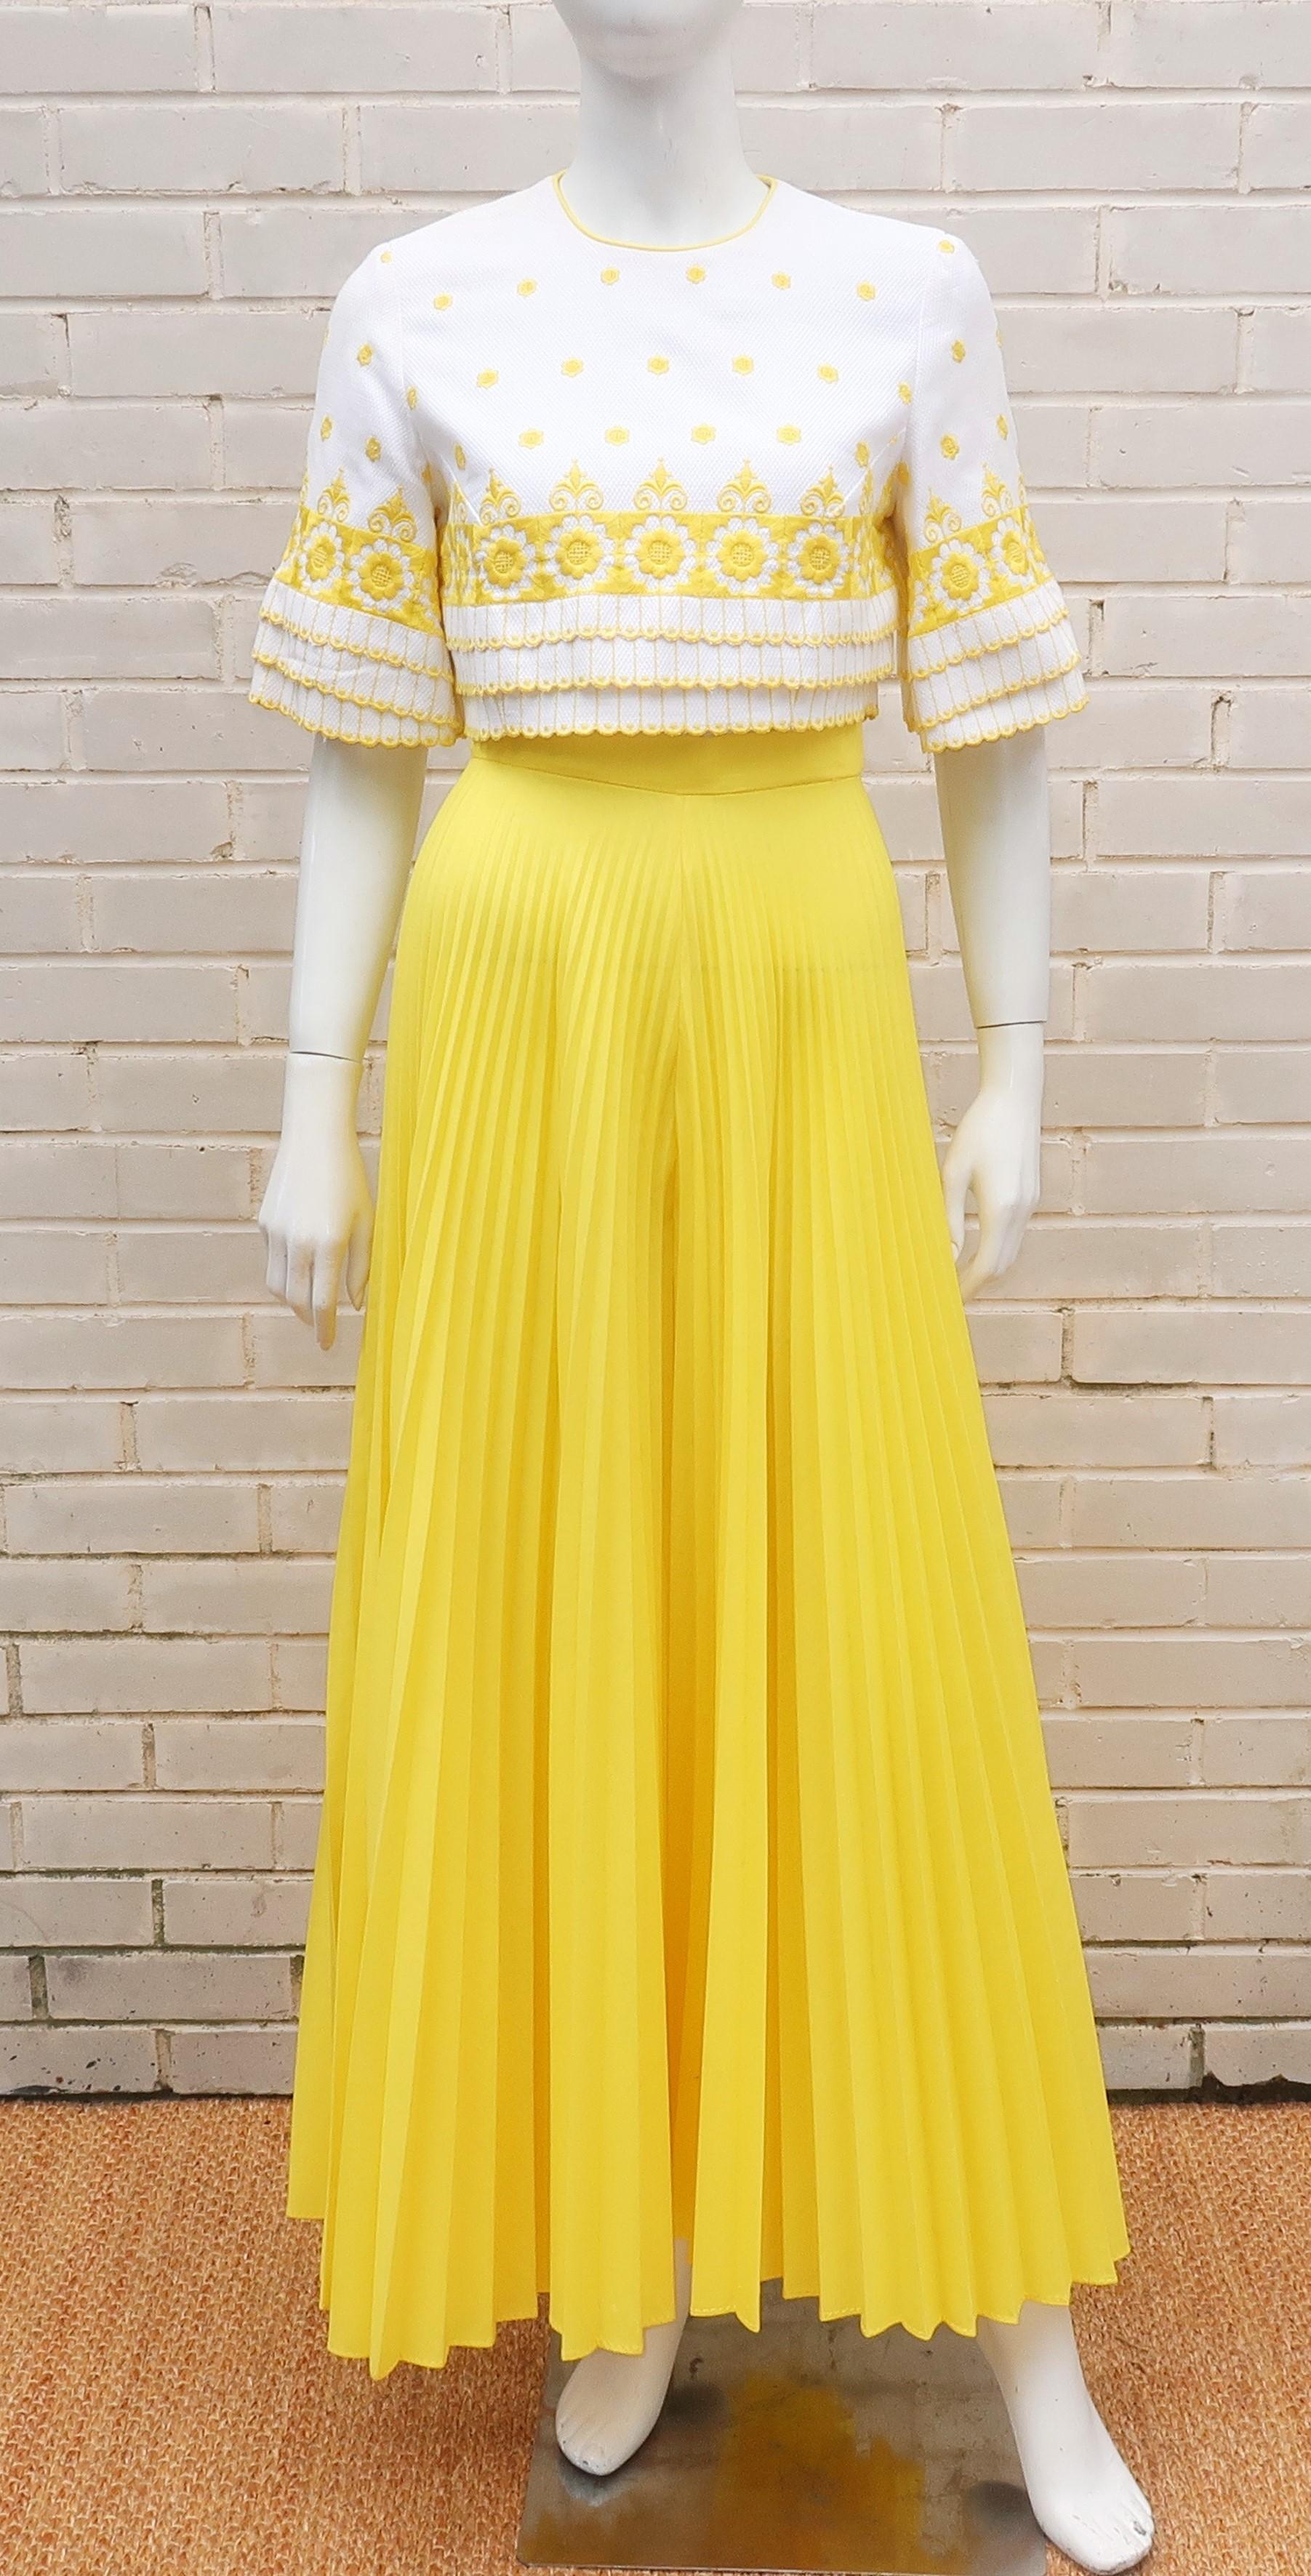 Adorable 1960's yellow and white palazzo ensemble including top and pants.  The white cotton pique cropped top buttons up the back and is decorated with yellow floral embroidery and scalloped tiers at the hem and cuffs.  The wide legged yellow